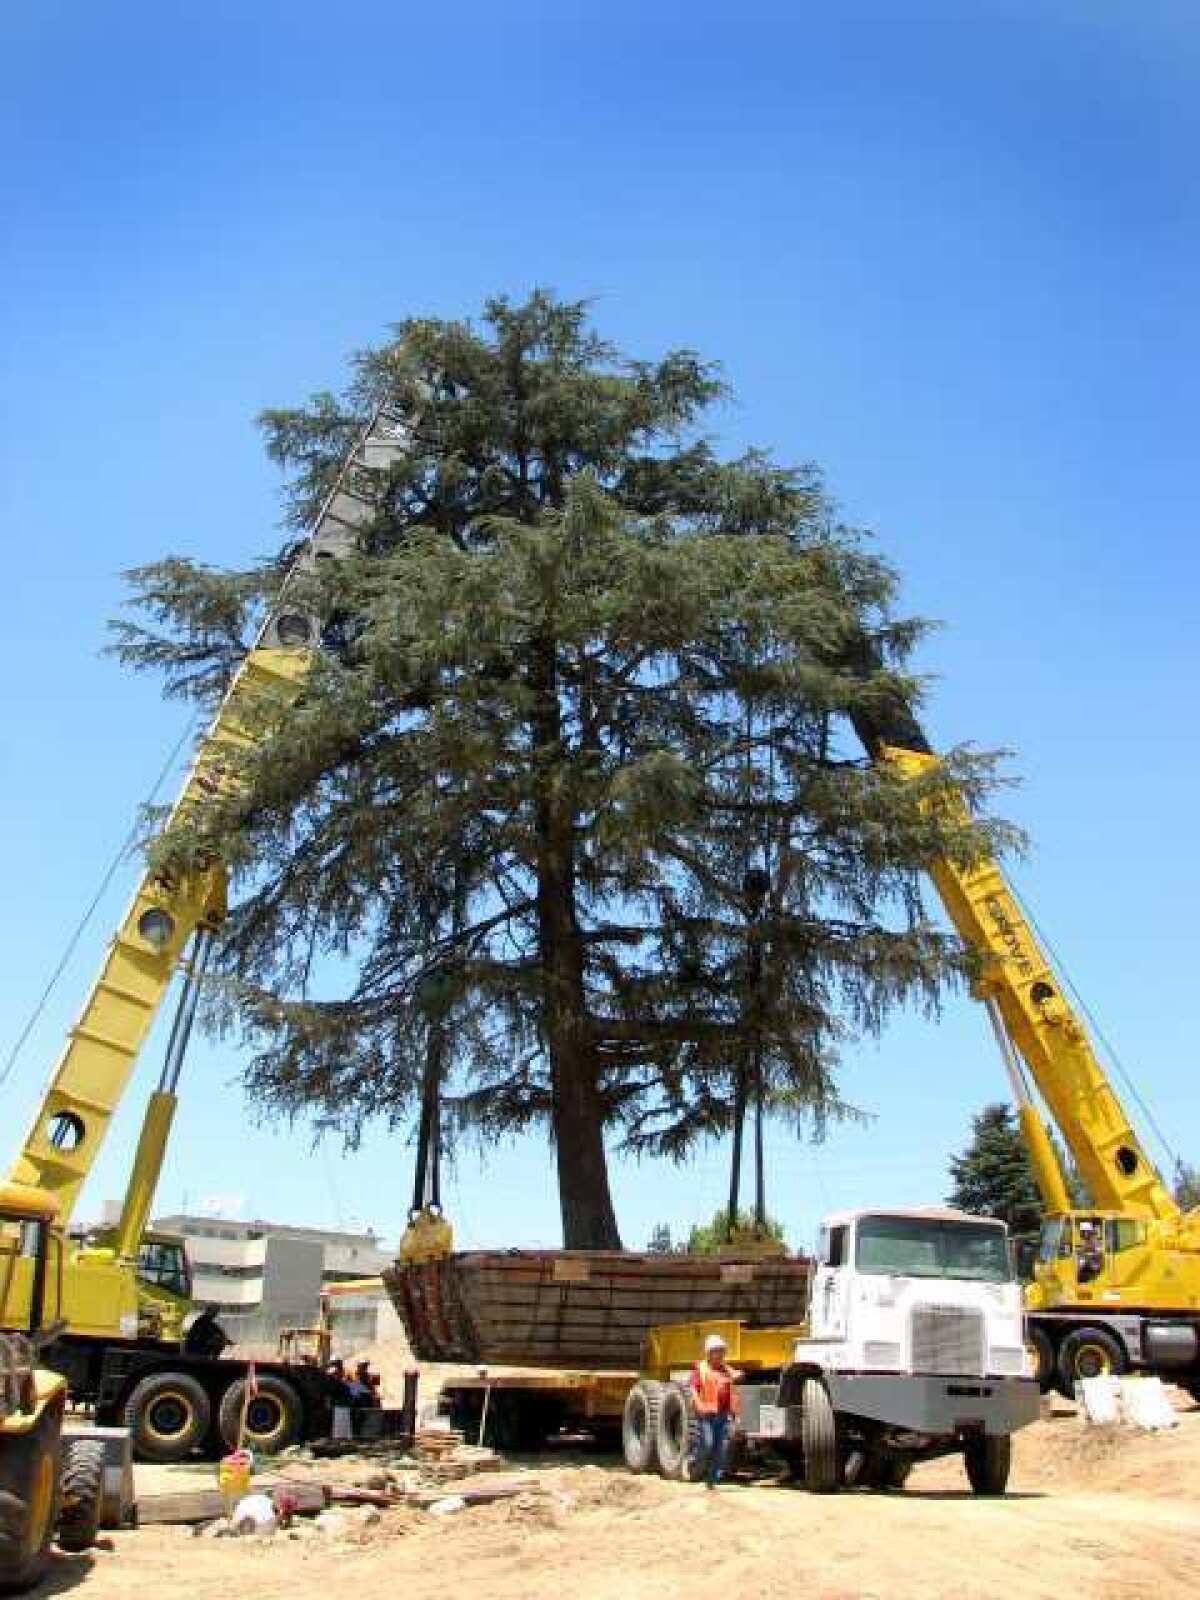 Deodar cedars have a long history in La Canada Flintridge. The city might keep them on a protected tree list.